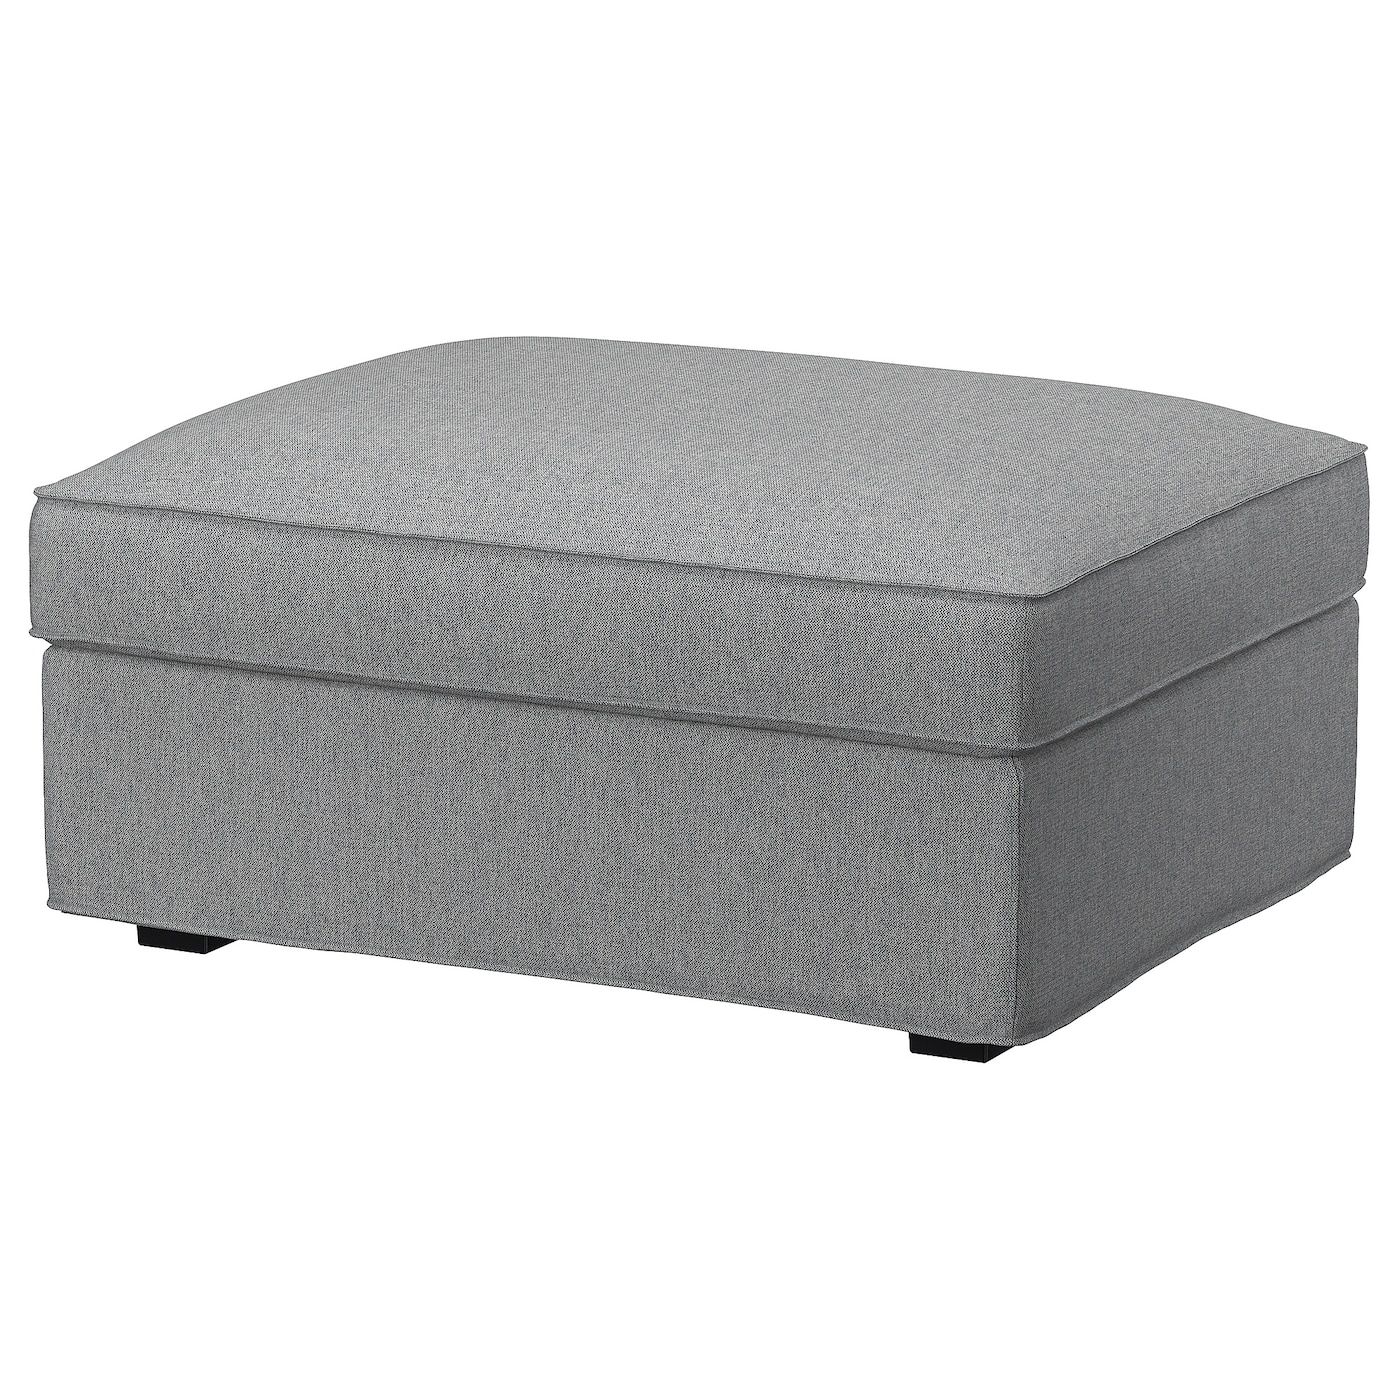 Kivik Ottoman With Storage, Tibbleby Beige/gray – Ikea Intended For Gray Ottomans (View 1 of 15)